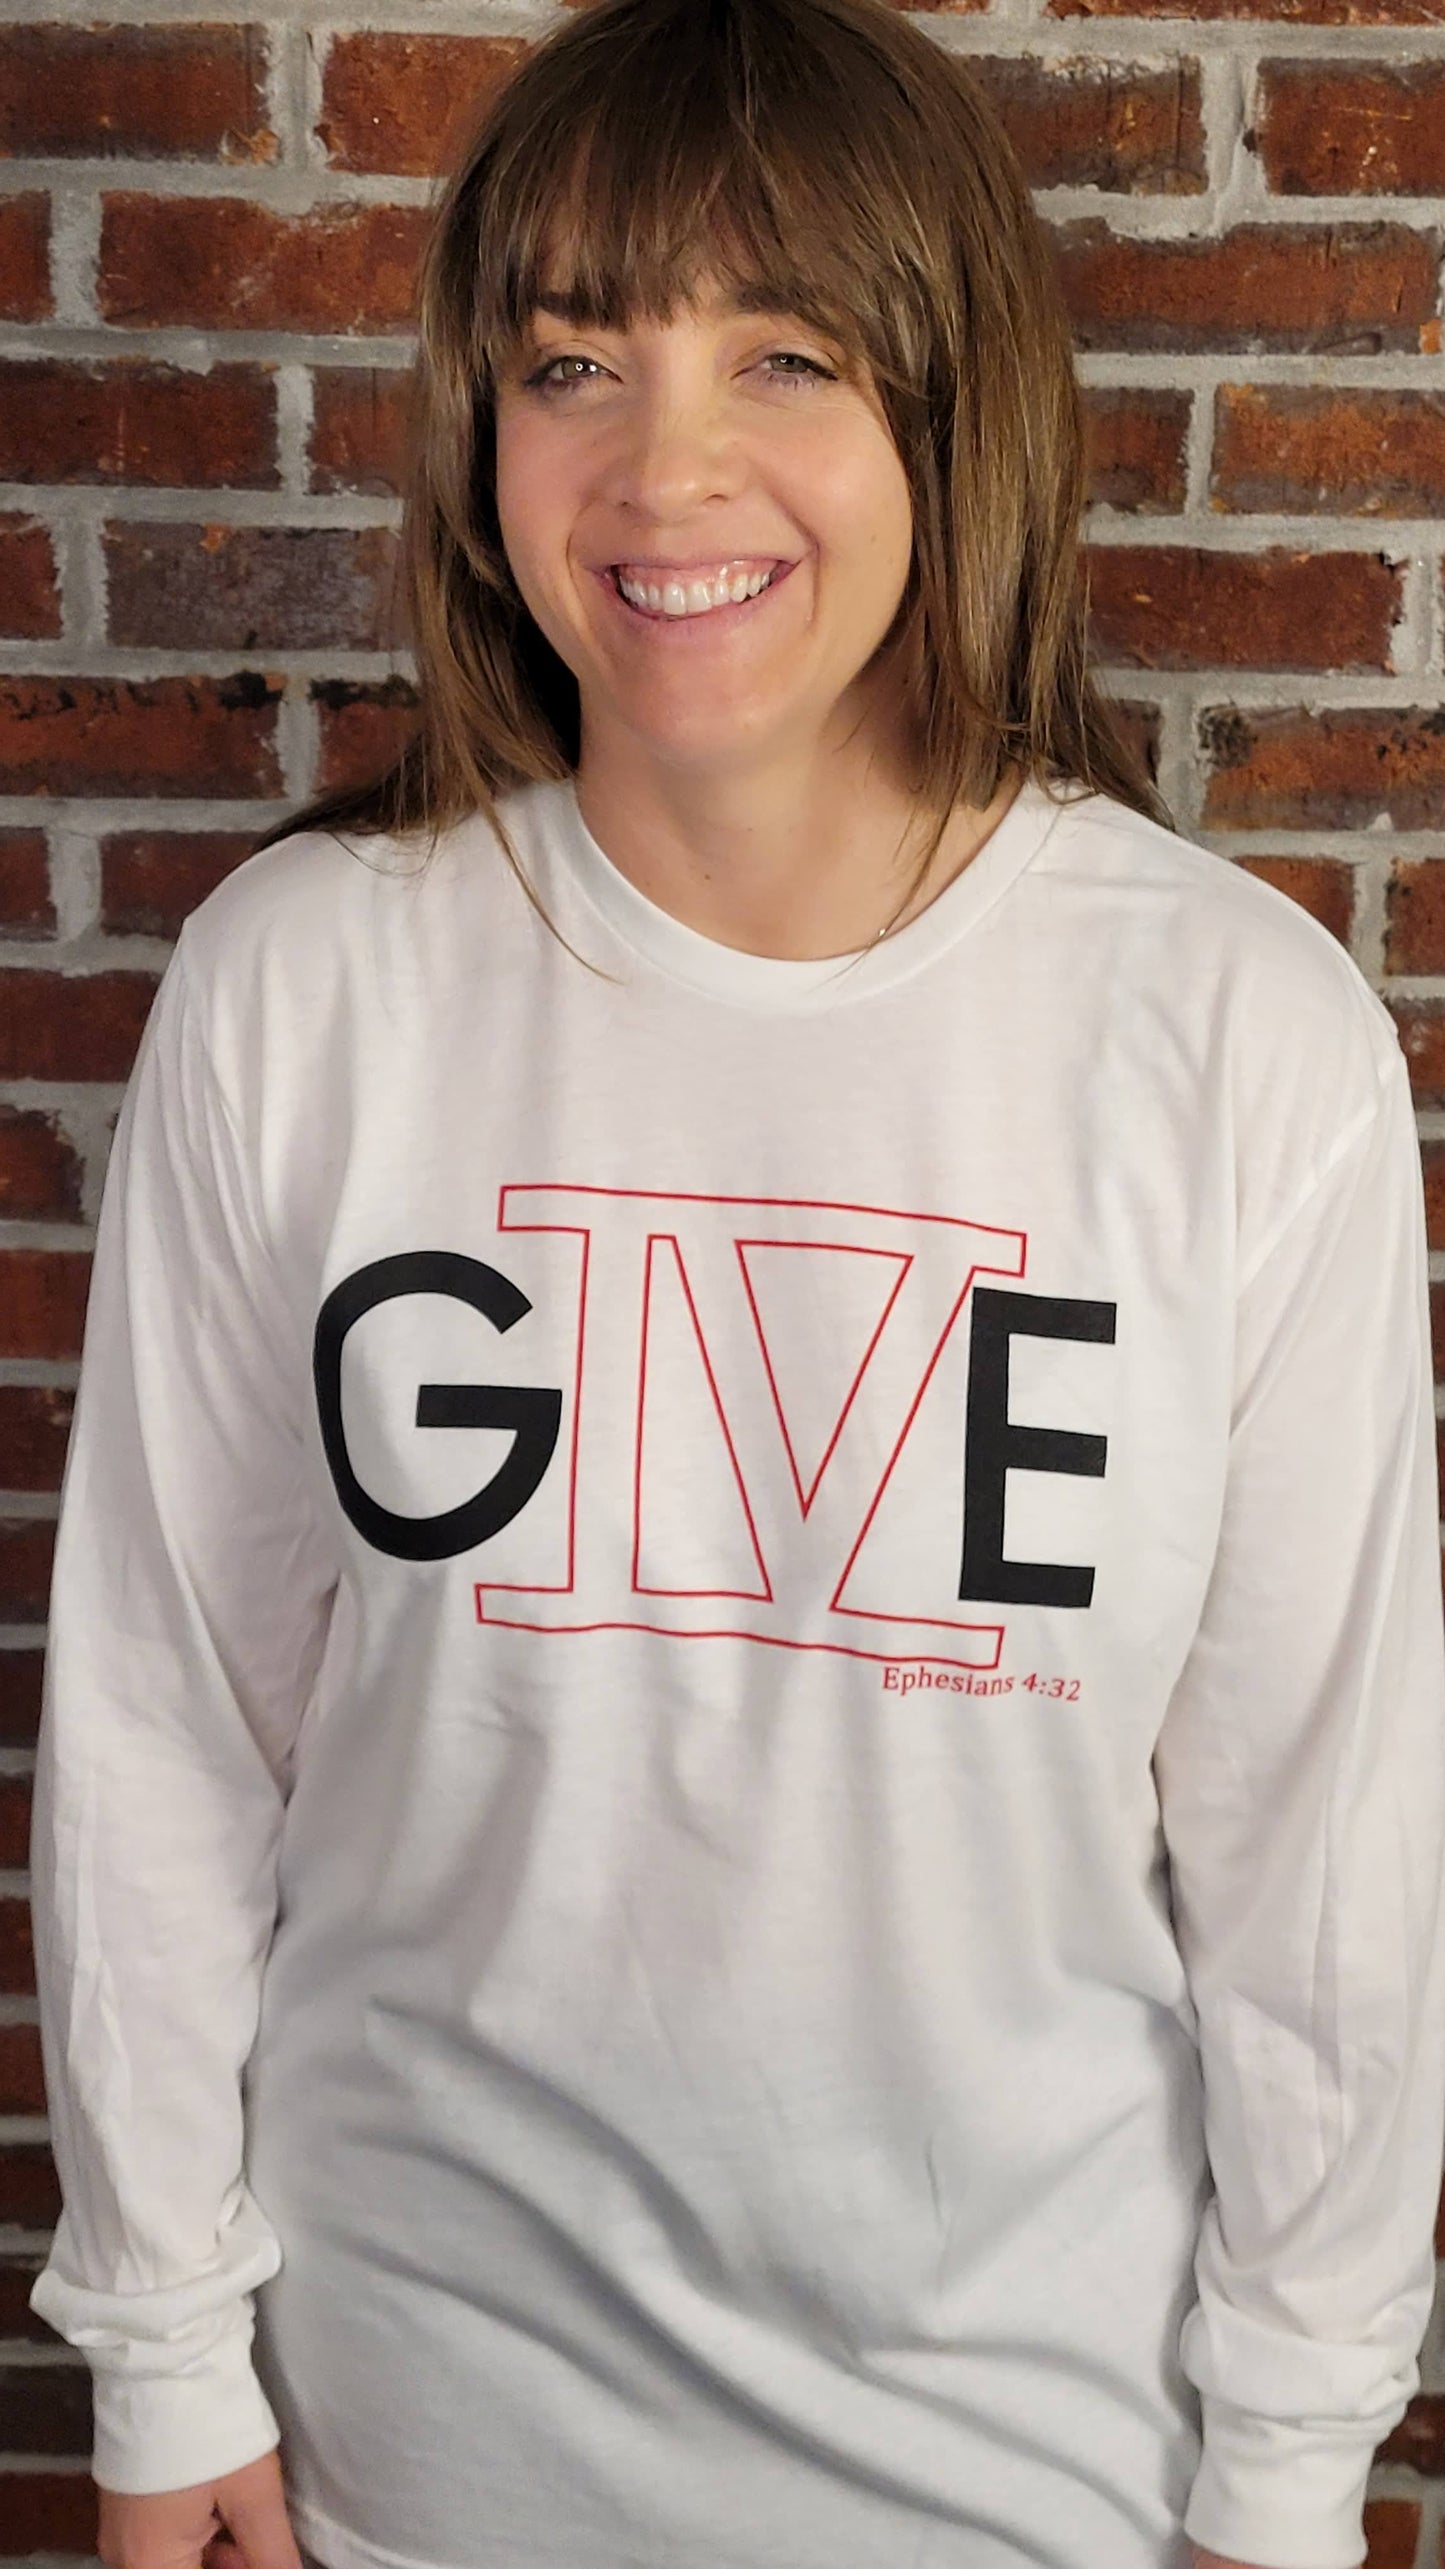 FOuRGIVE Long Sleeves